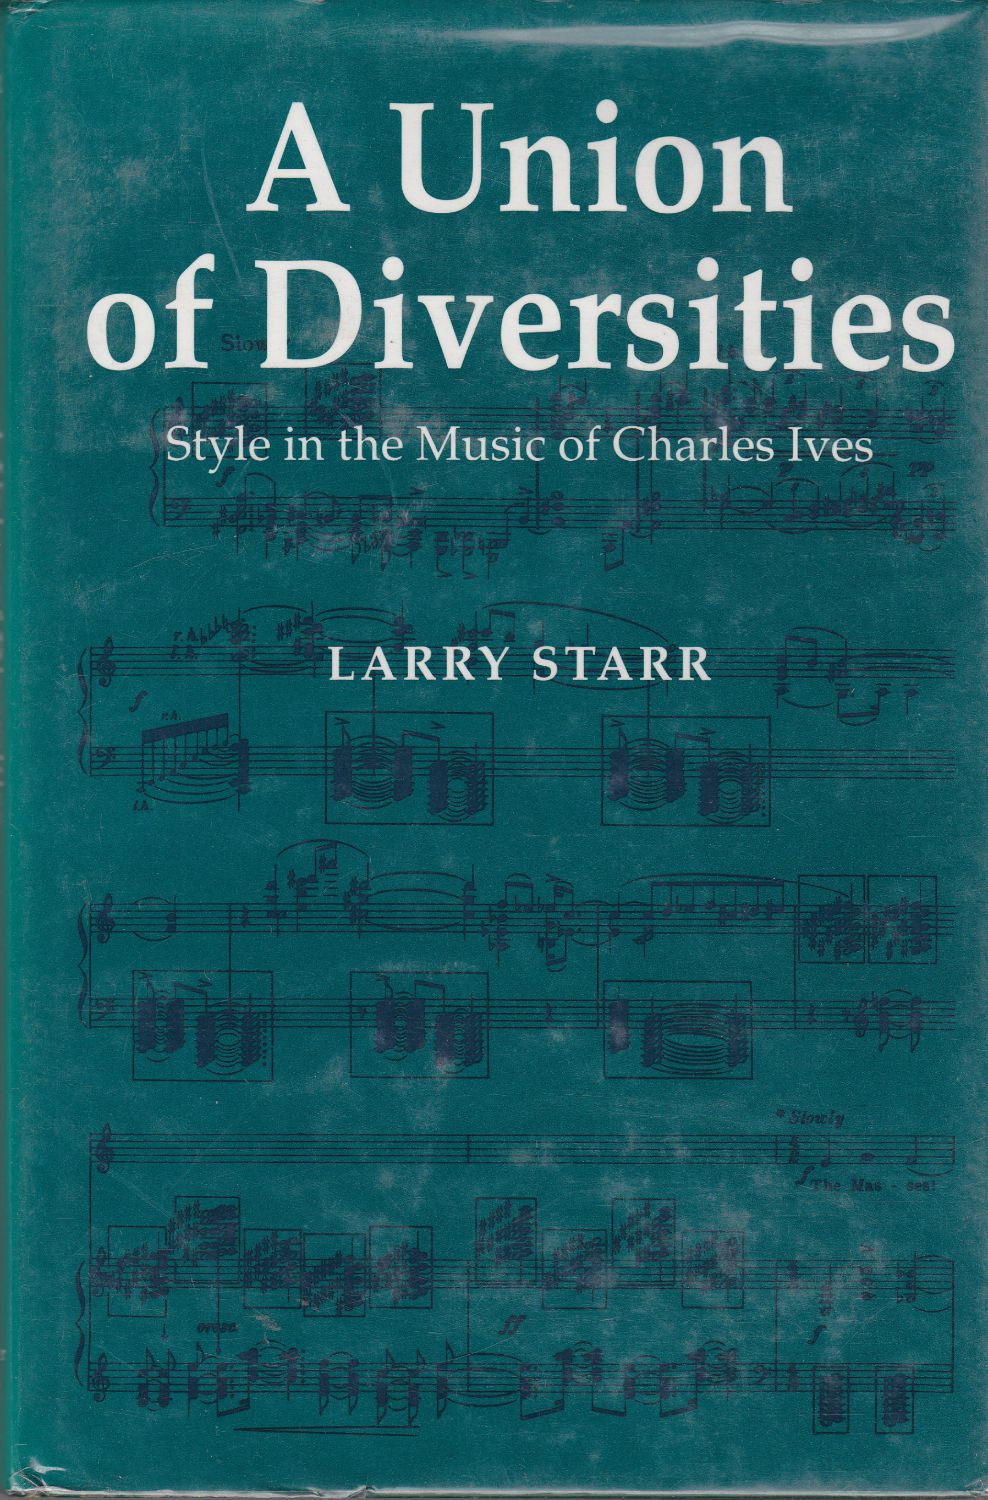 A union of diversities : style in the music of Charles Ives.